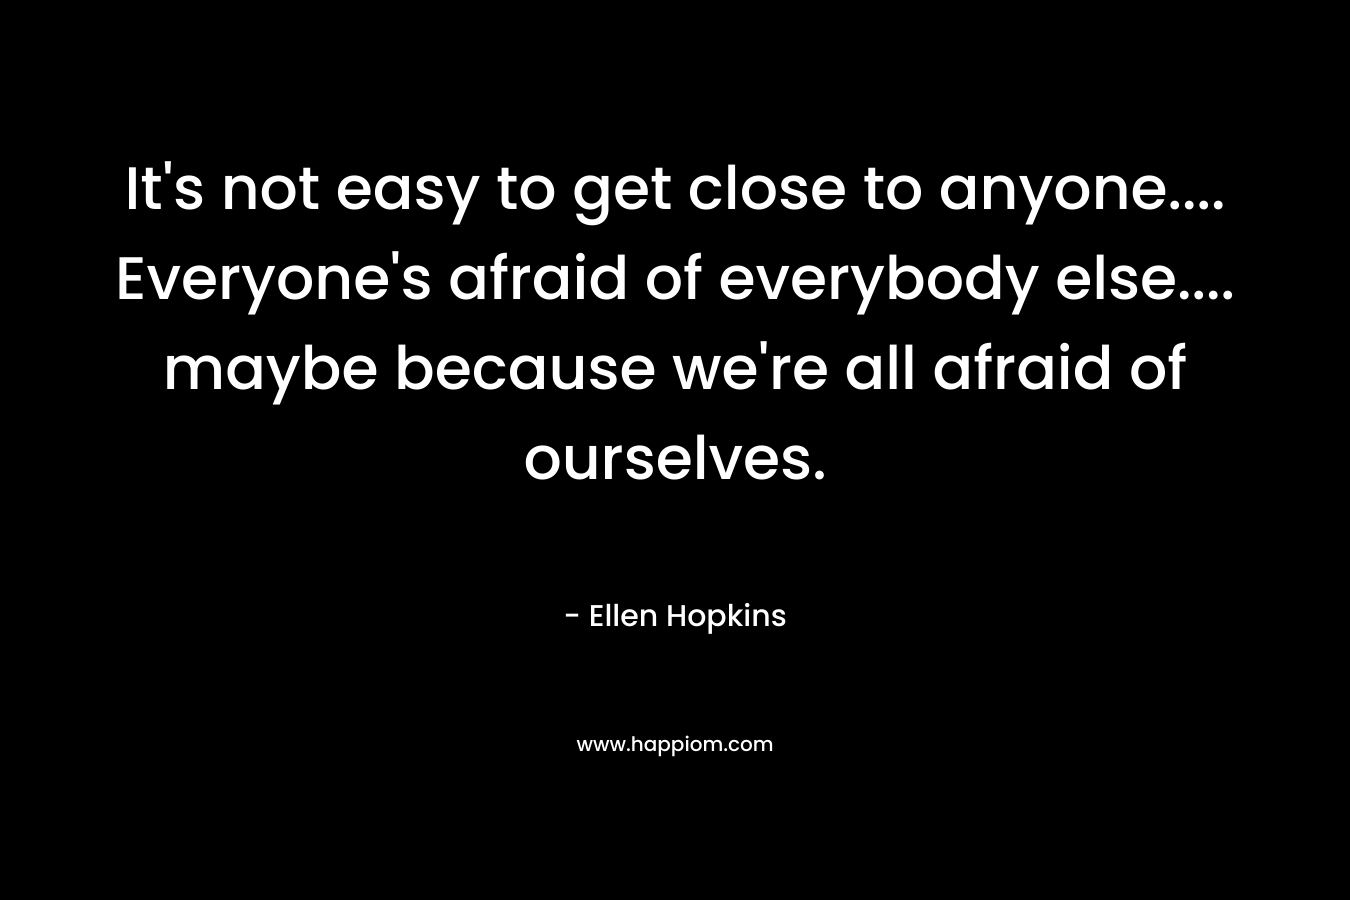 It’s not easy to get close to anyone…. Everyone’s afraid of everybody else…. maybe because we’re all afraid of ourselves. – Ellen Hopkins